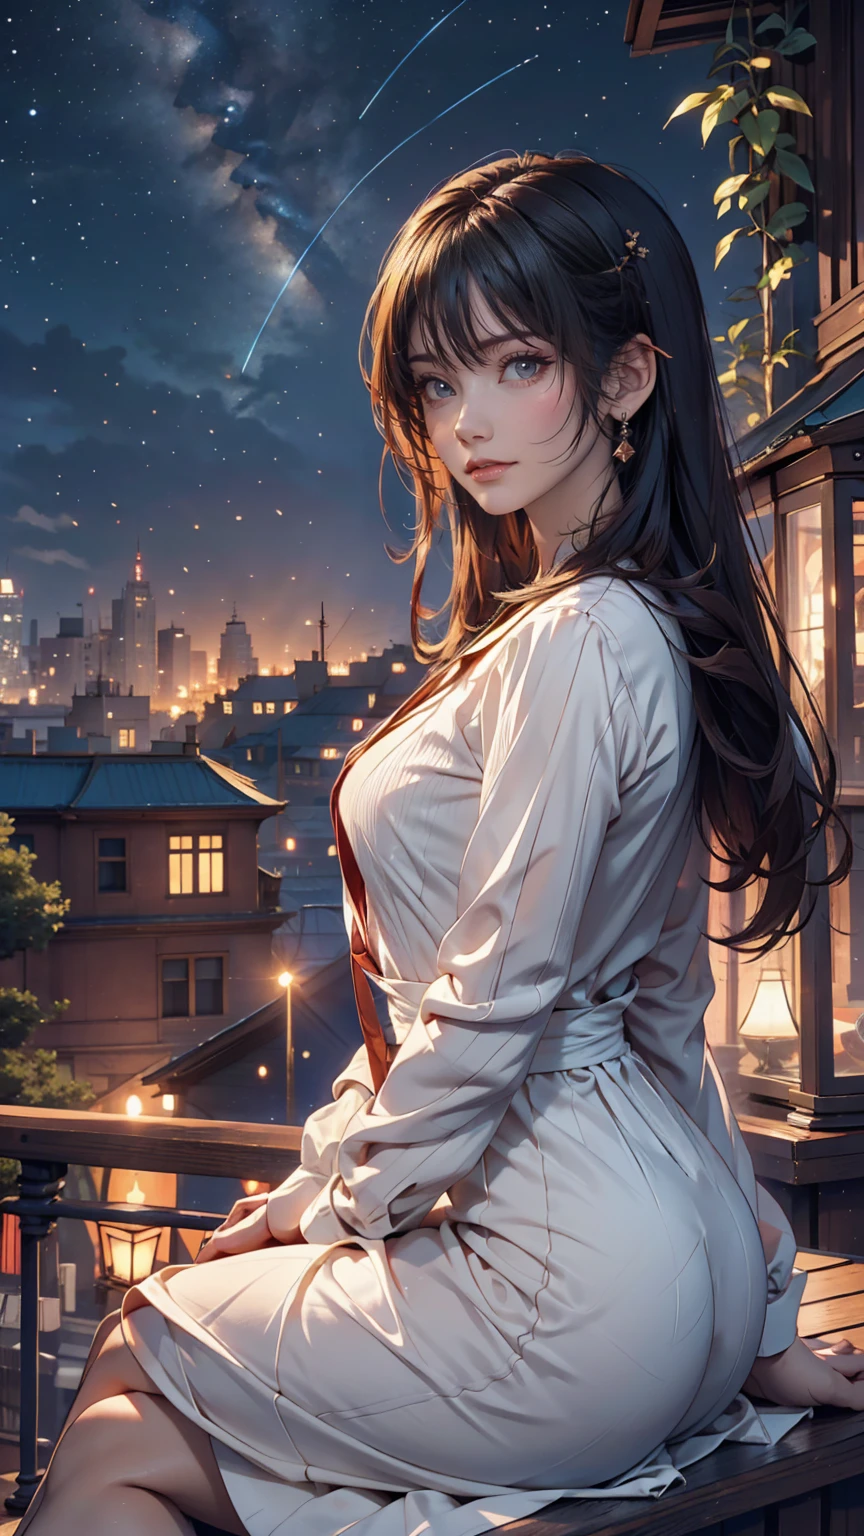 Highest quality, masterpiece, Very detailed, Detailed Background, anime, One girl, Young girl, Short girl, SF, SF, Outdoor, night, Starry Sky, greenhouse, huge structure, Biodome, Wind景, scenery, horizon, rooftop, sitting on rooftop, Wind, avert your eyes, Atmospheric lighting, Focus Only, close, From the side, Depth of written boundary, Bokeh